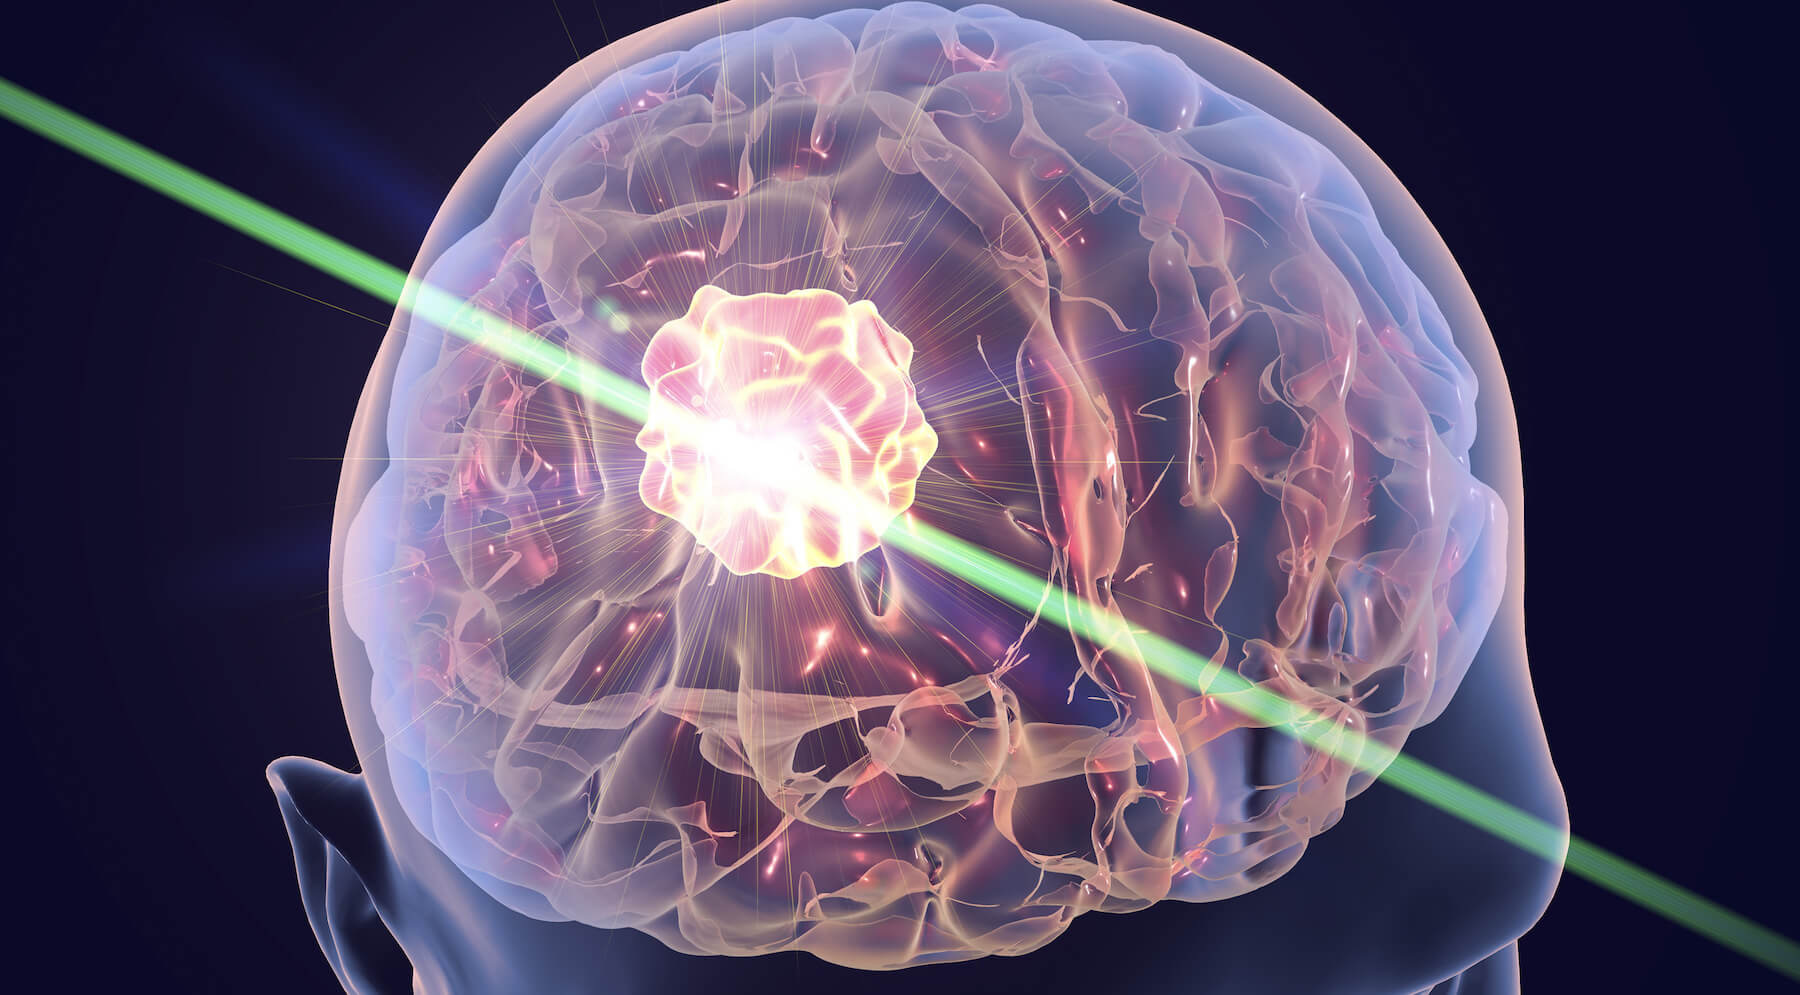 Doctors offer to treat Alzheimer's disease by laser